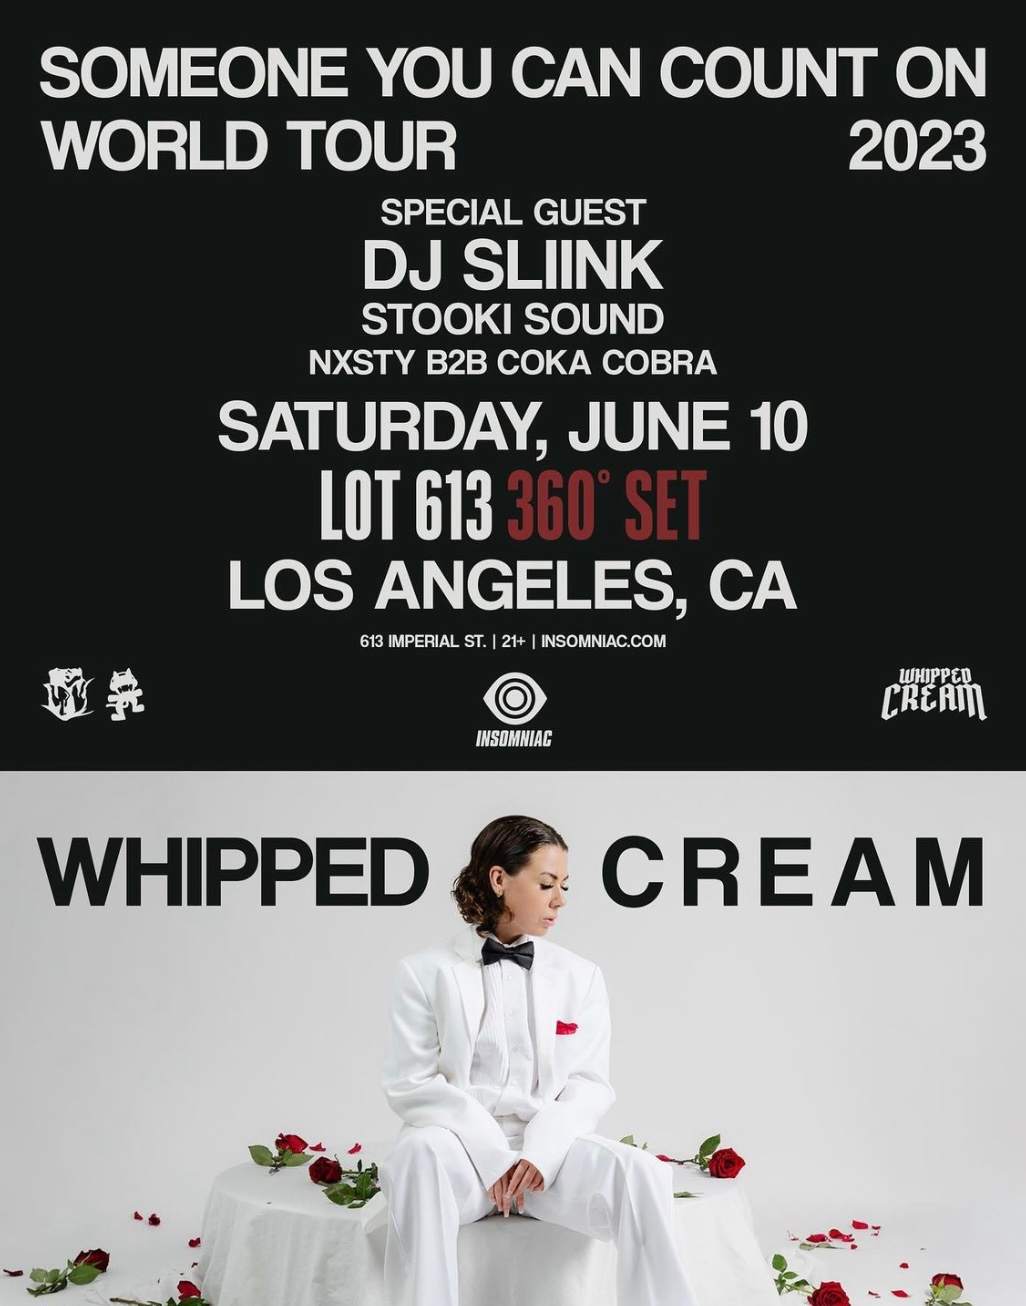 WHIPPED CREAM SOMEONE YOU CAN COUNT ON TOUR - フライヤー表